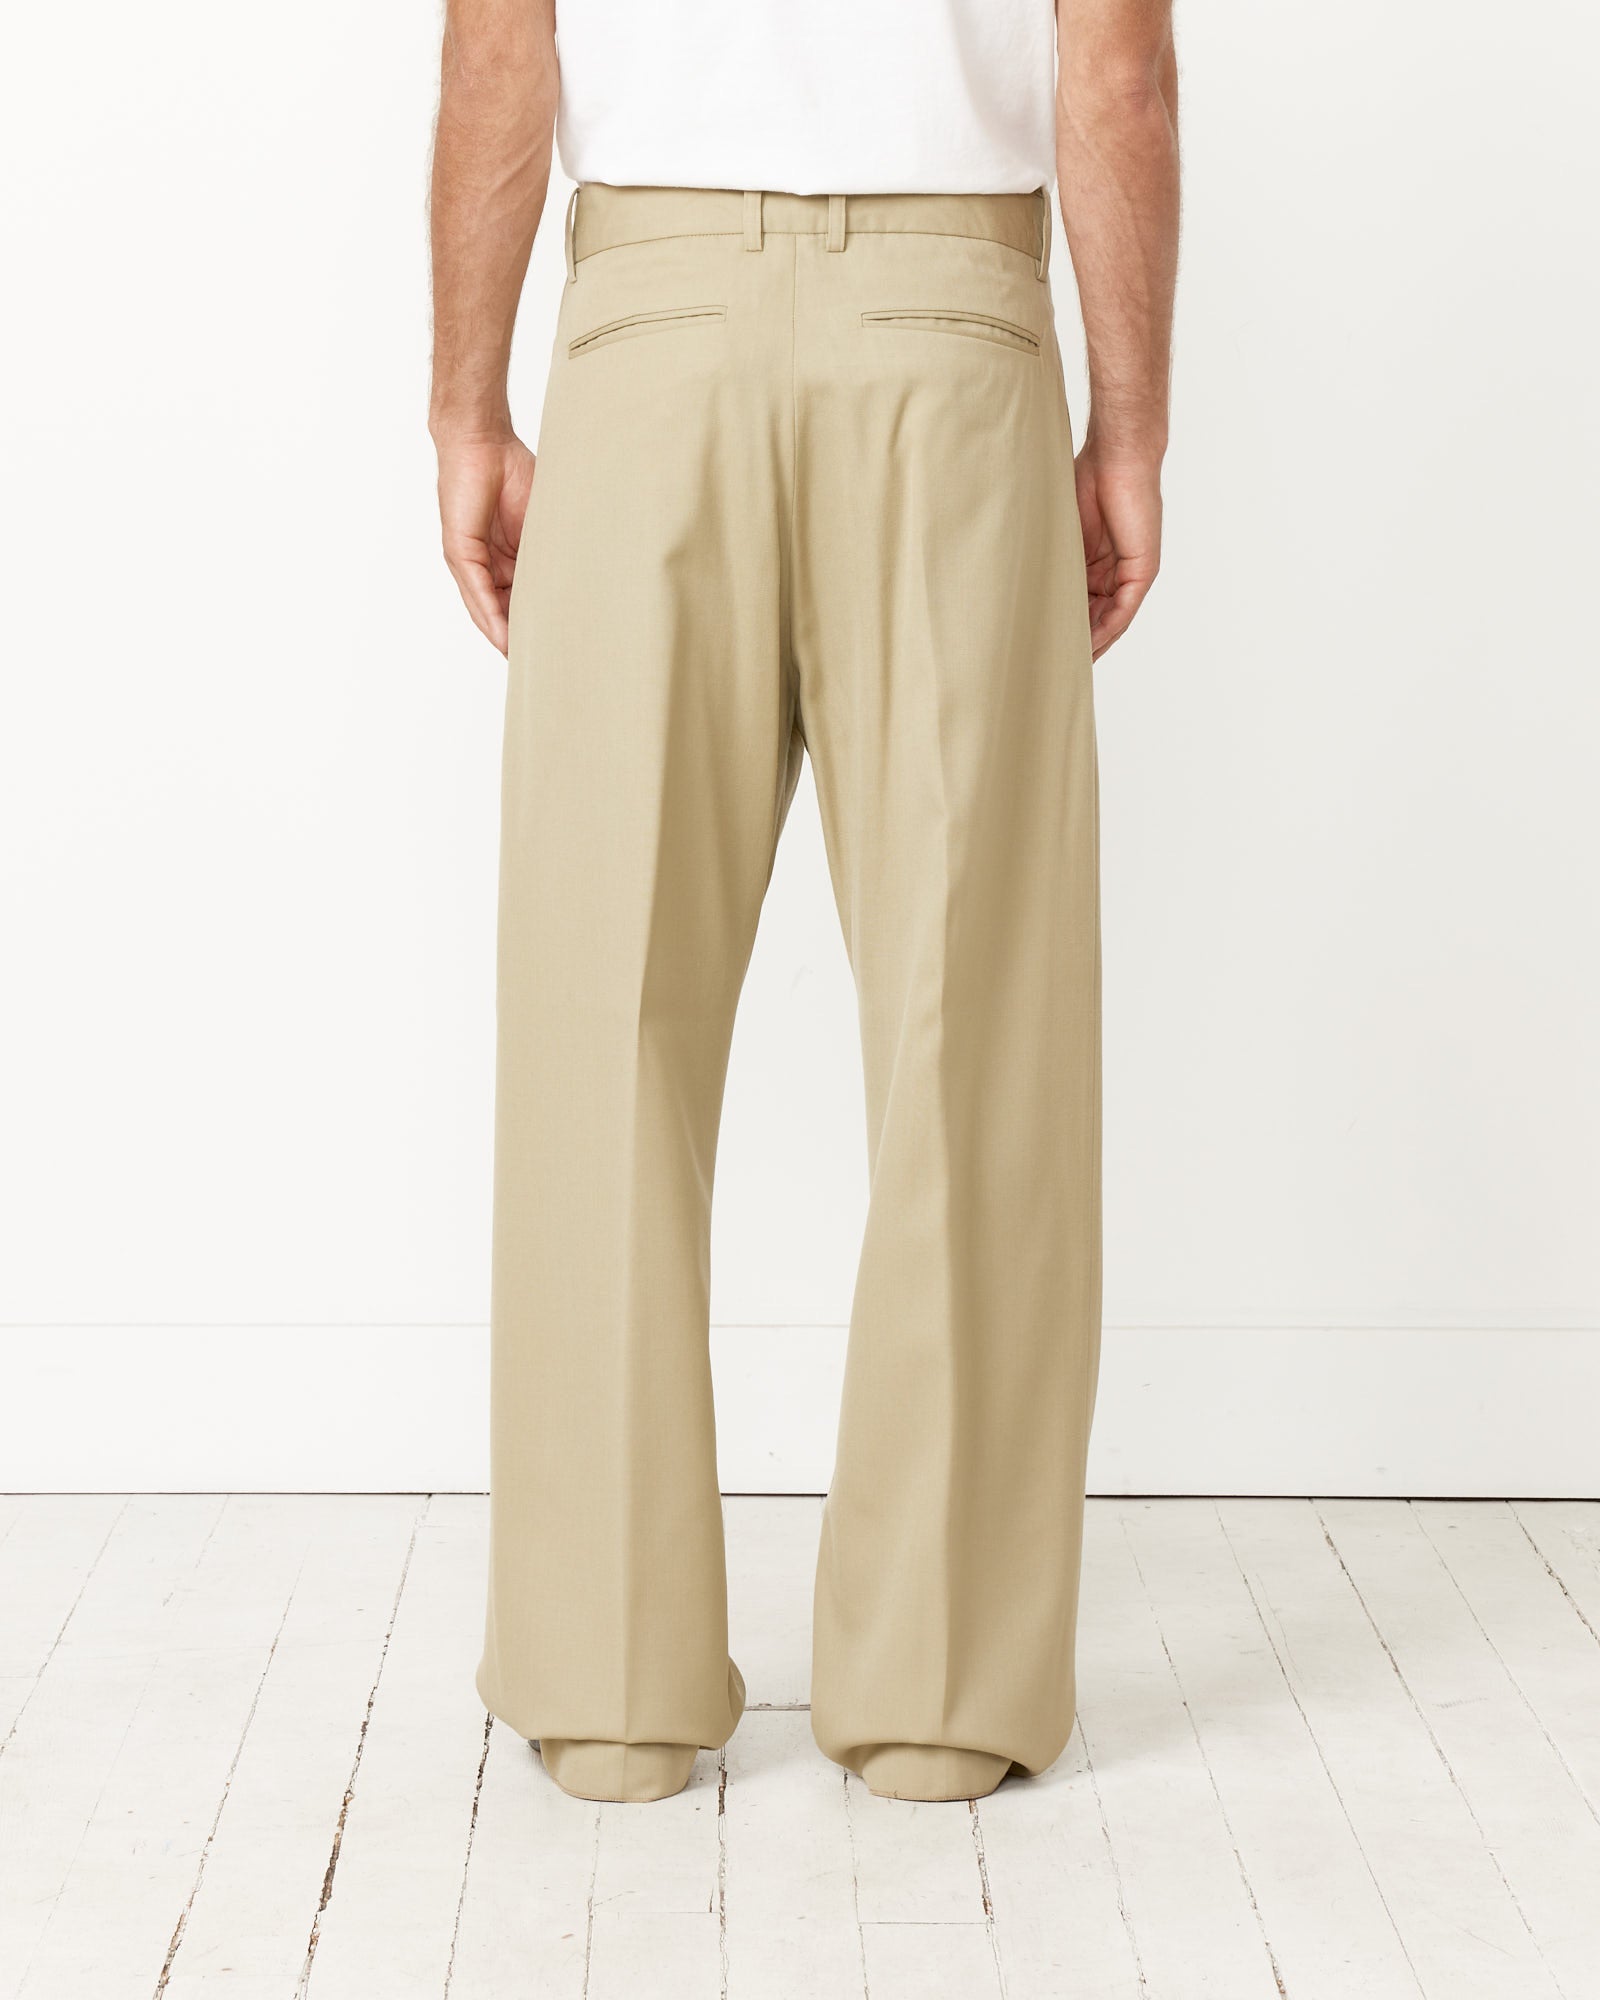 body wrappers m191 jazz pant mens – dancefashionssuperstore